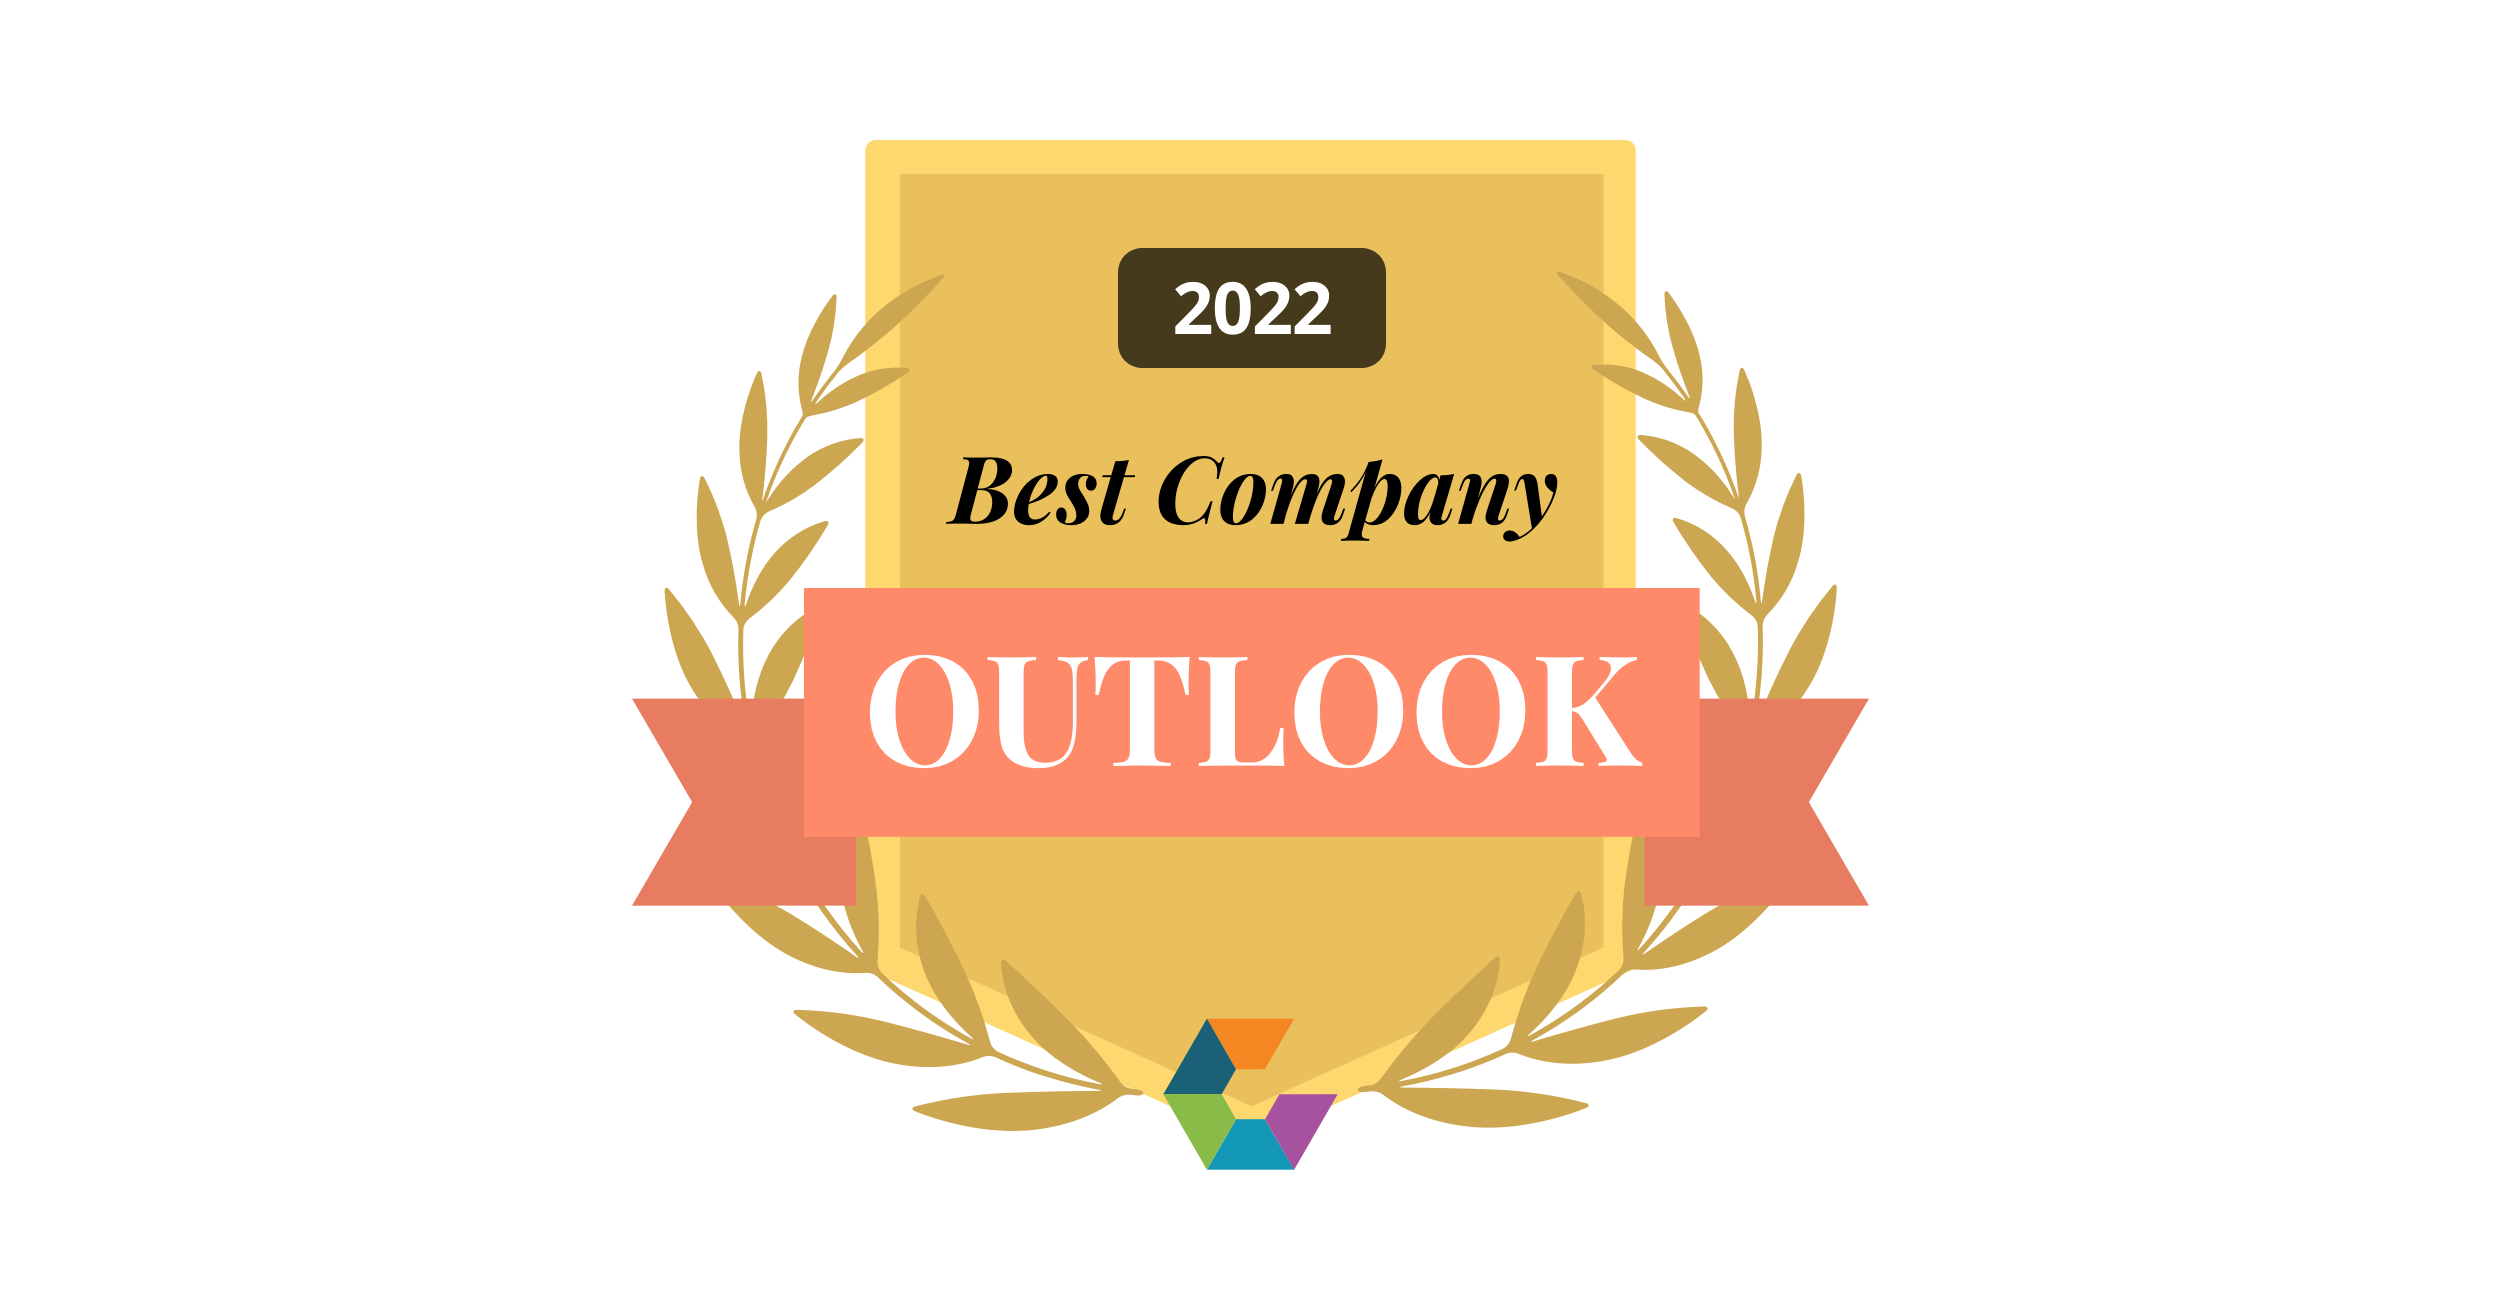 Comparably Best Company Outlook Award